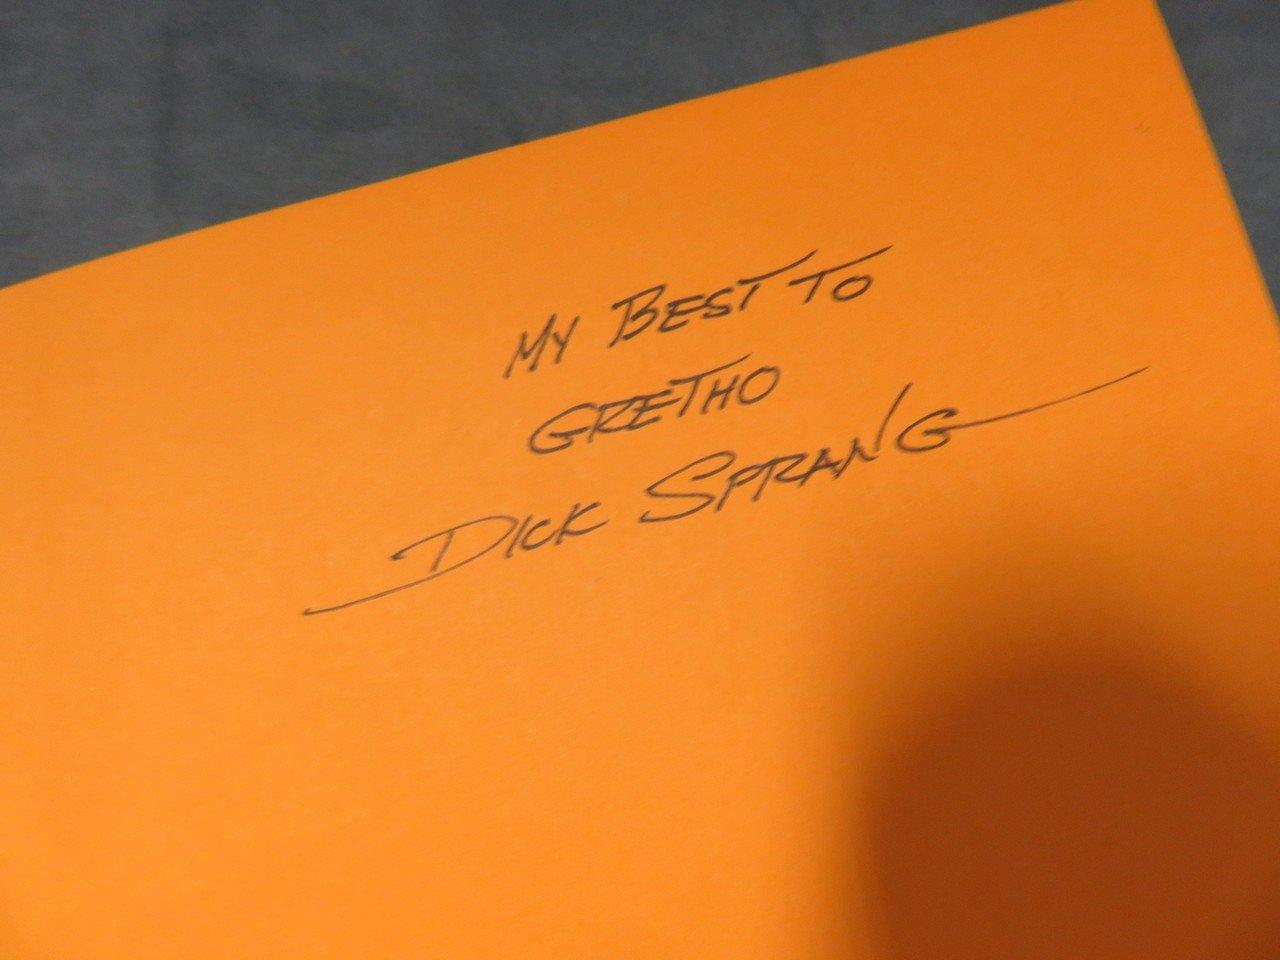 Dick Sprang Signed DC Hardcover